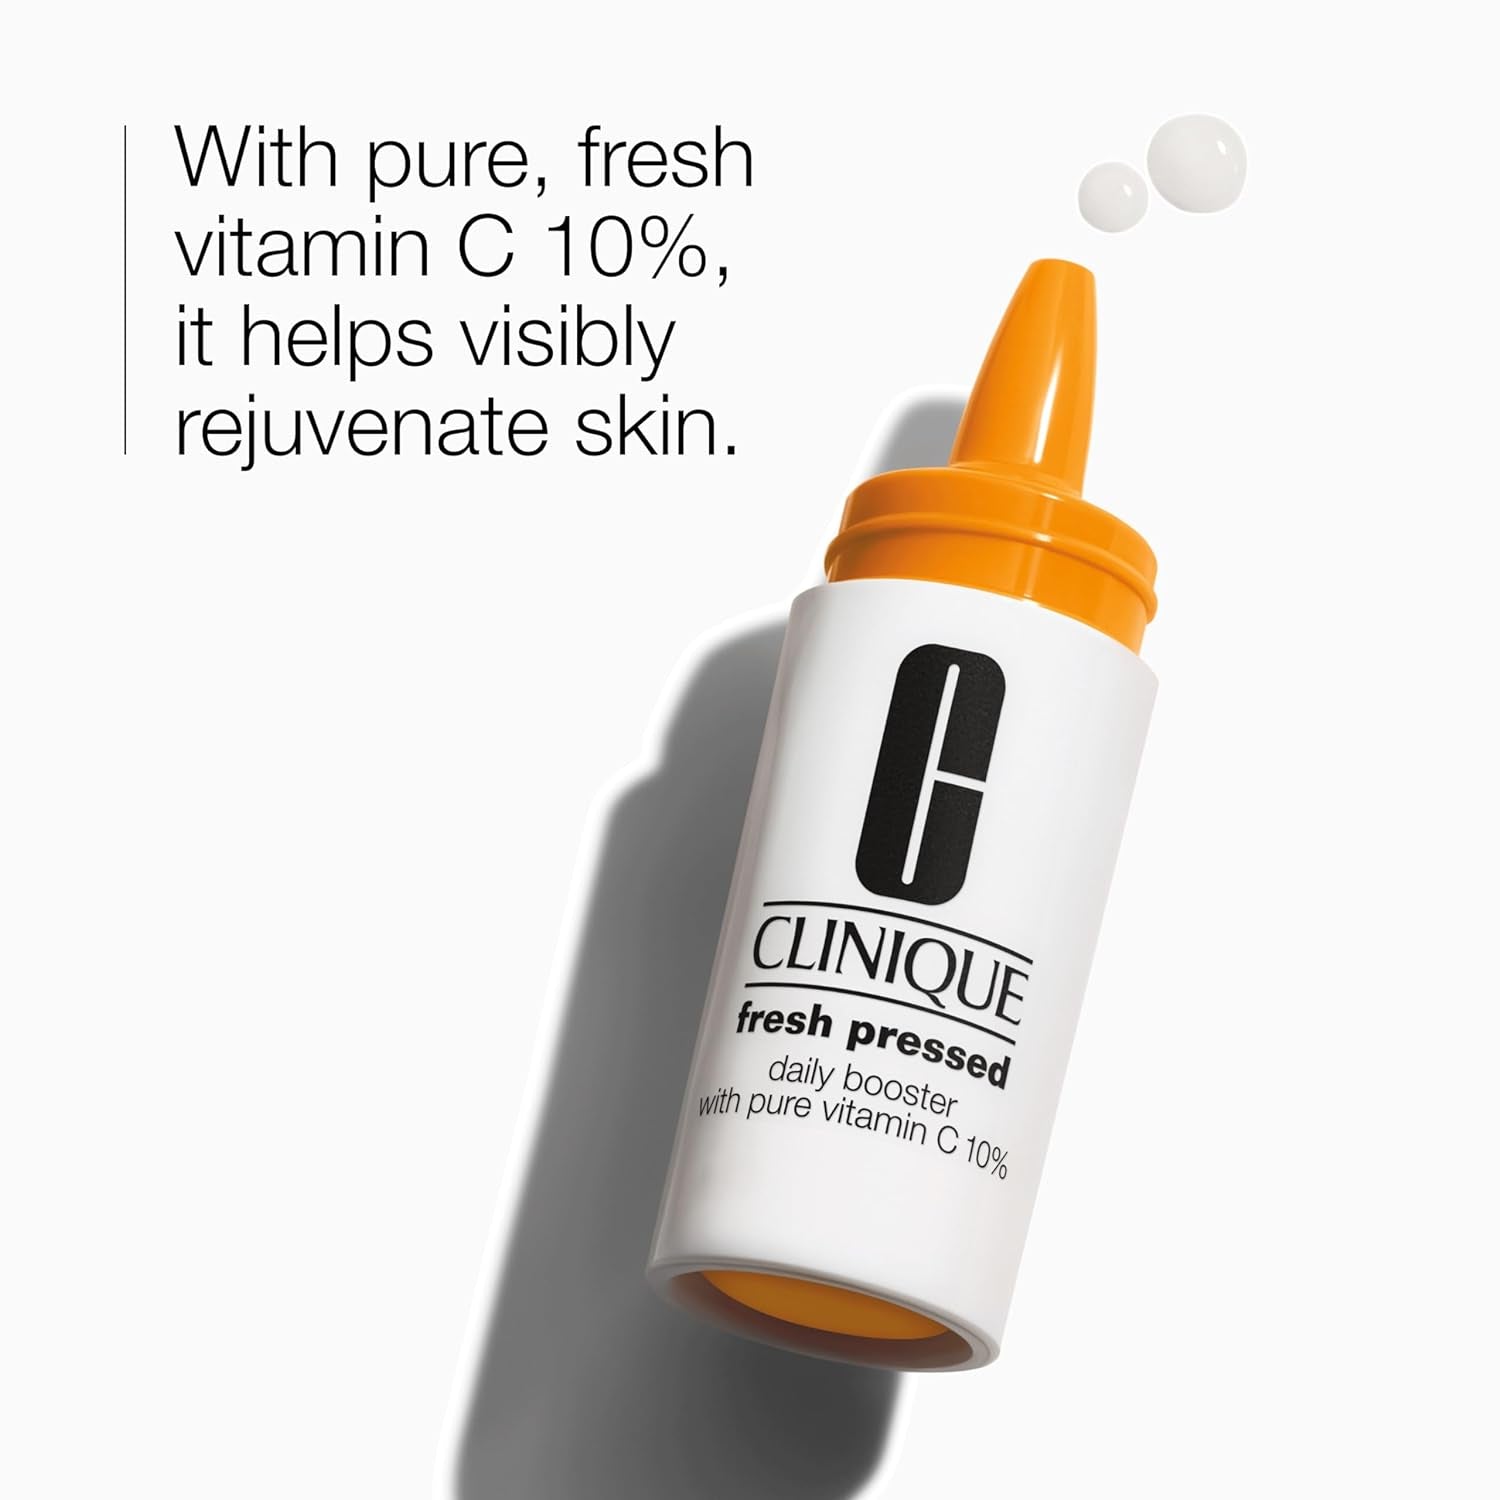 Clinique Fresh Pressed Daily Moisturizer Booster with Pure Vitamin C 10%